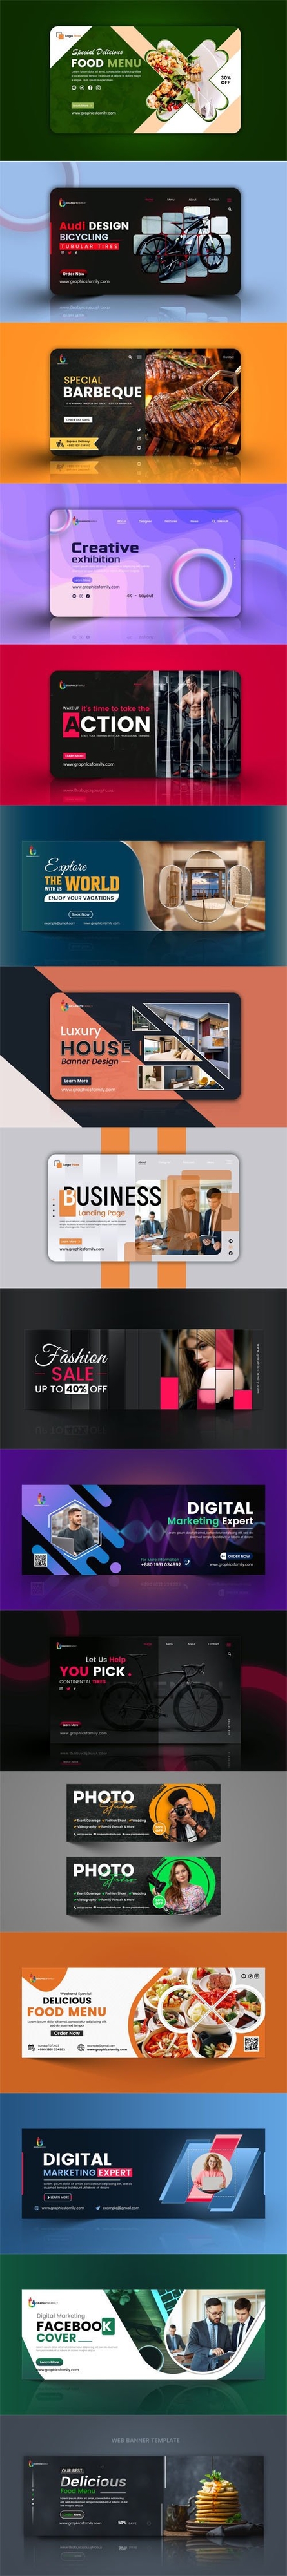 15+ Web Banners & Facebook Covers - Advertising PSD Templates Collection